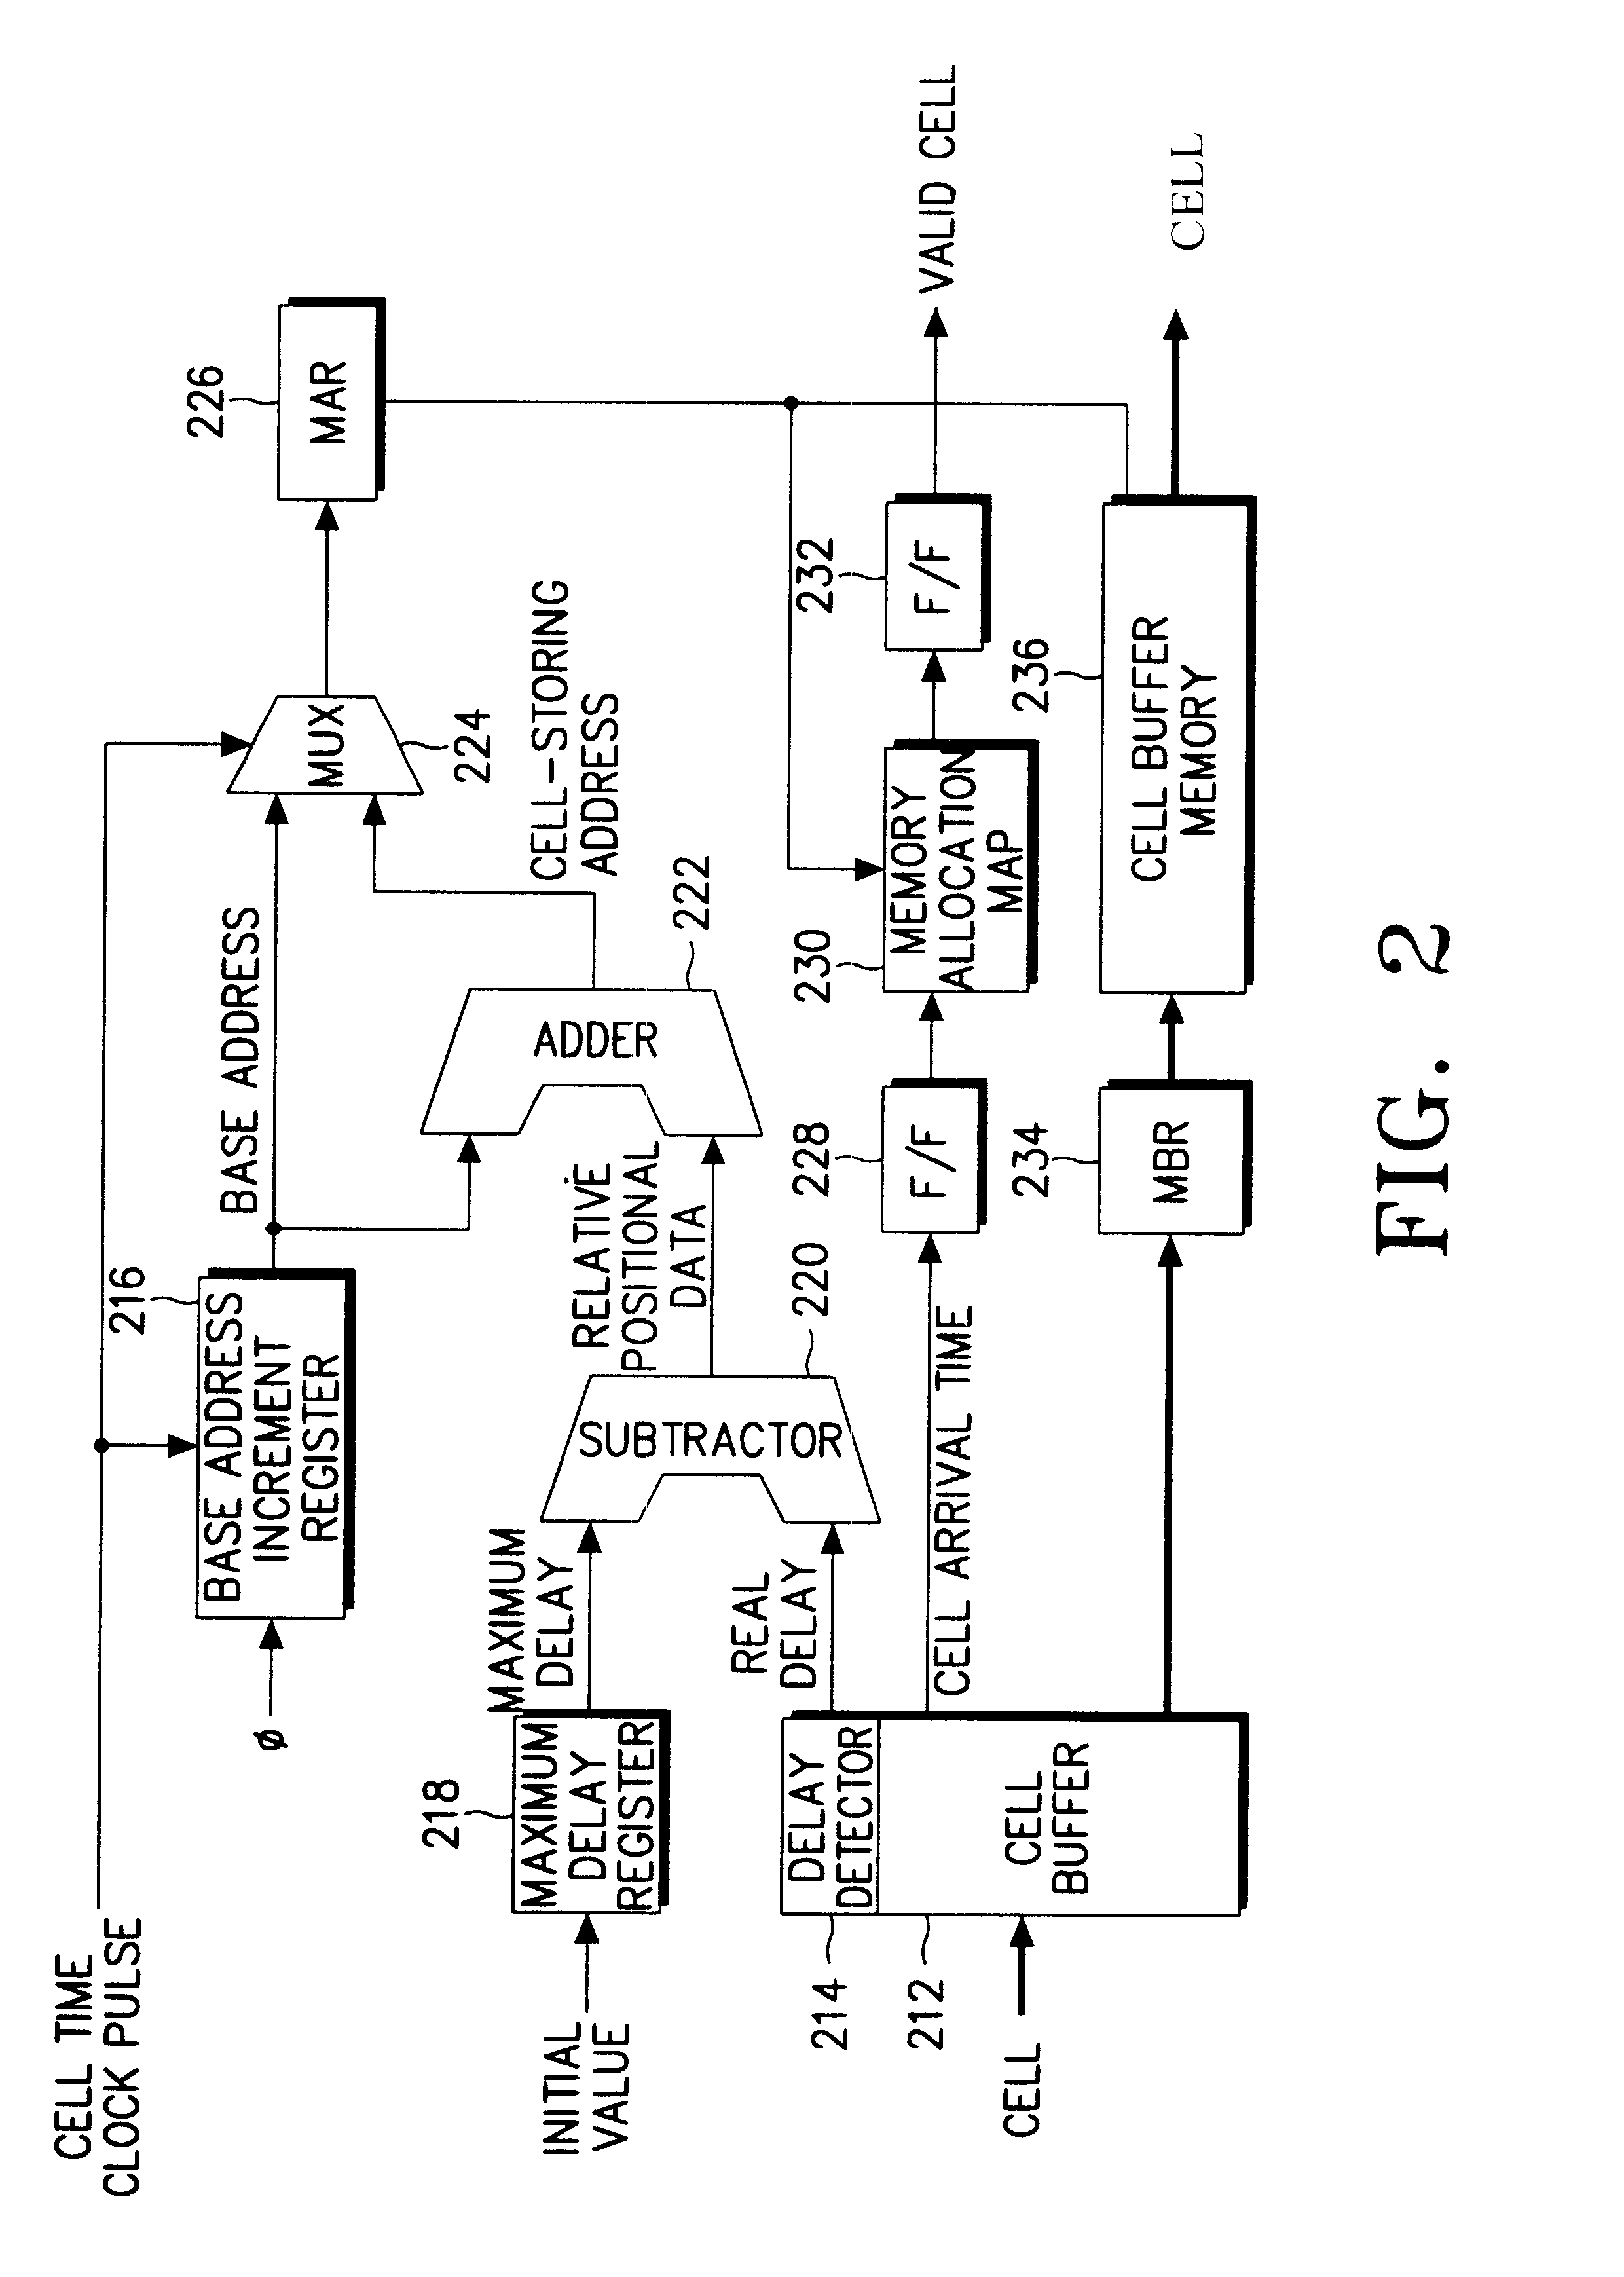 Data packet re-sequencer